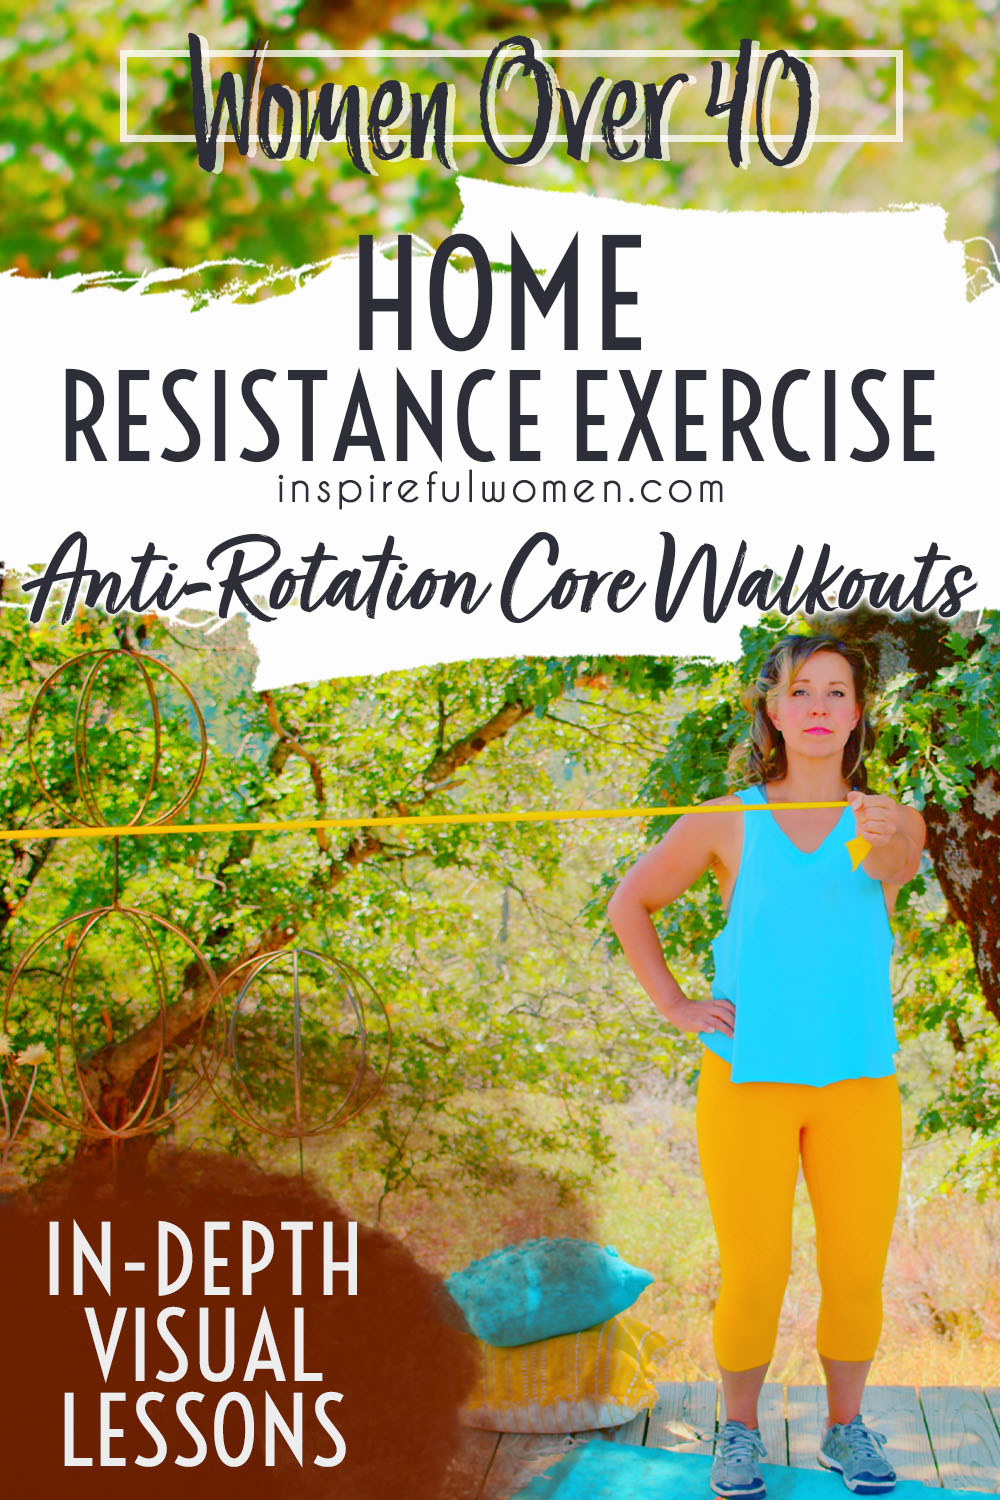 single-arm-anti-rotation-resistance-band-core-walkouts-standing-oblique-exercise-women-over-40